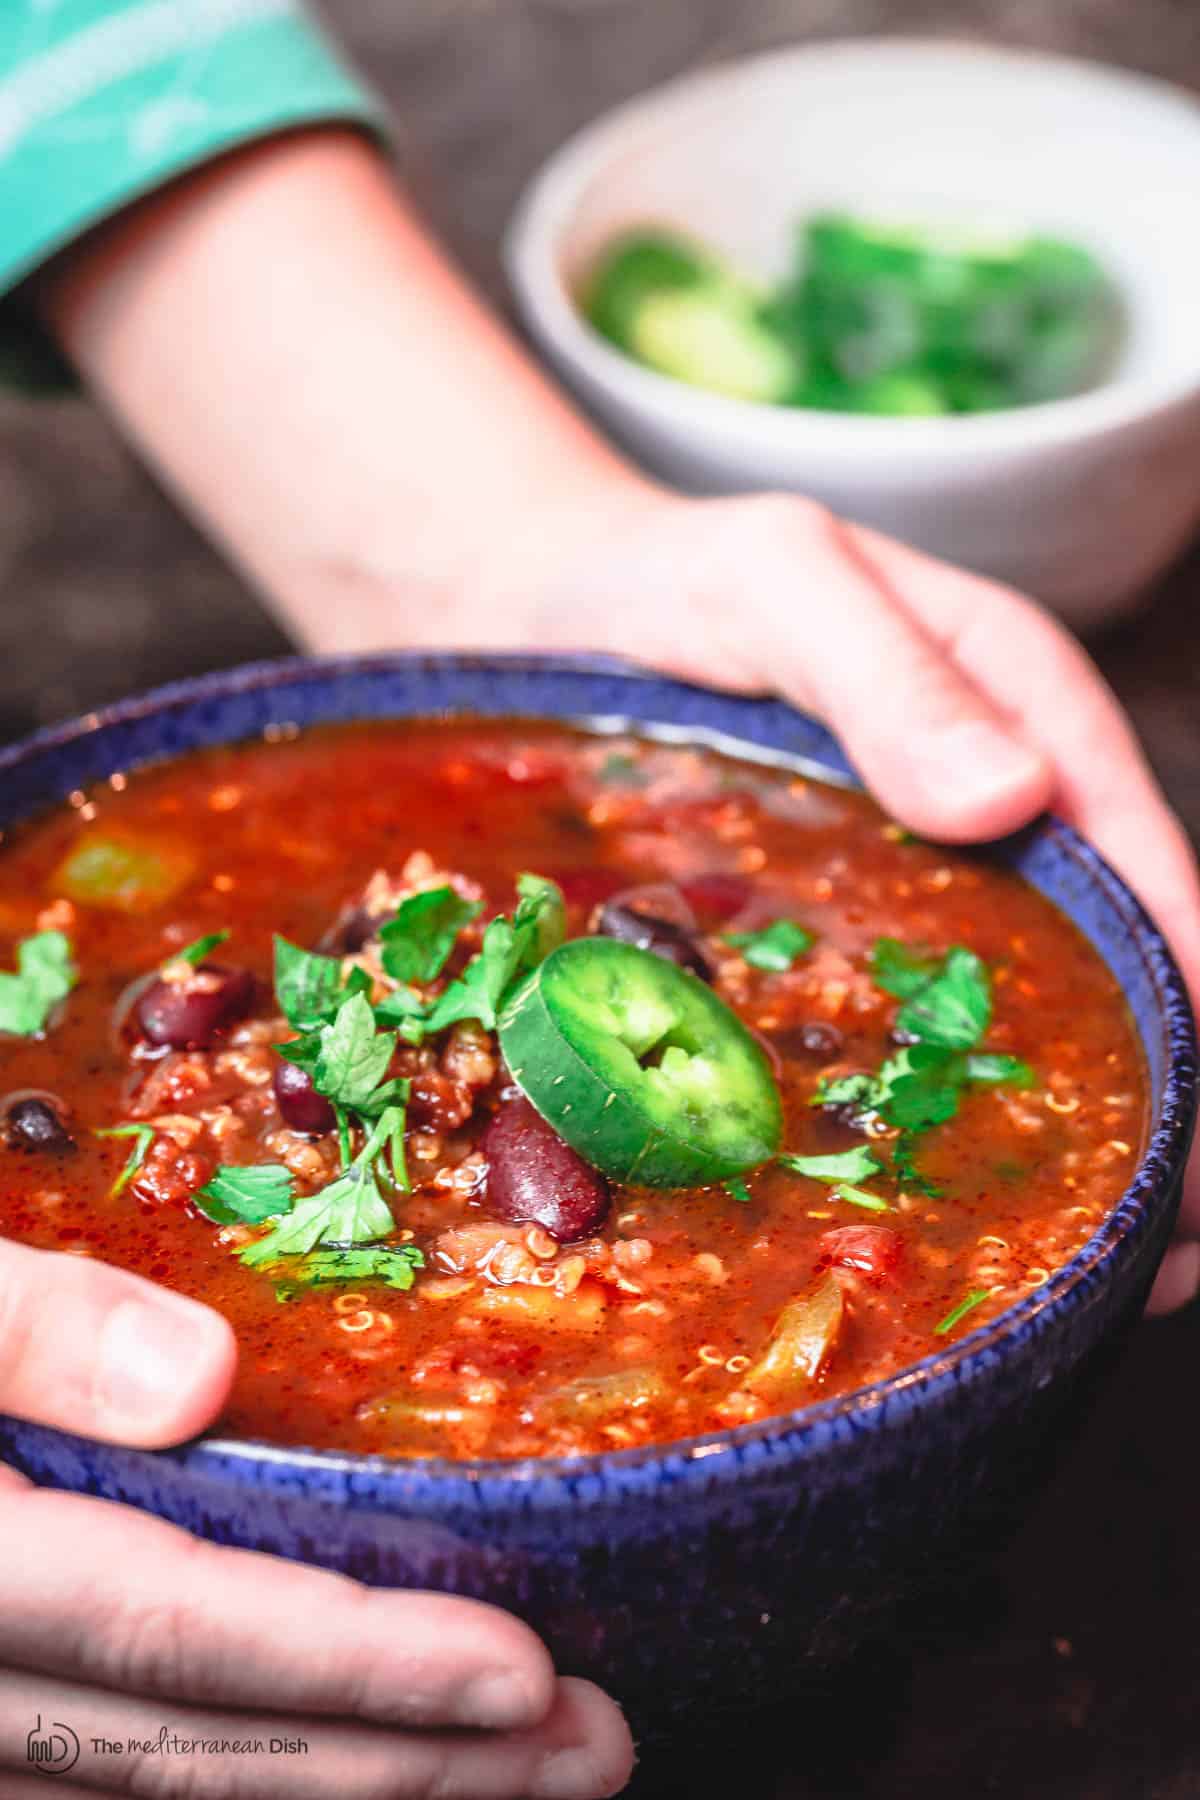 Bowl of vegan chili being held with a pair of hands